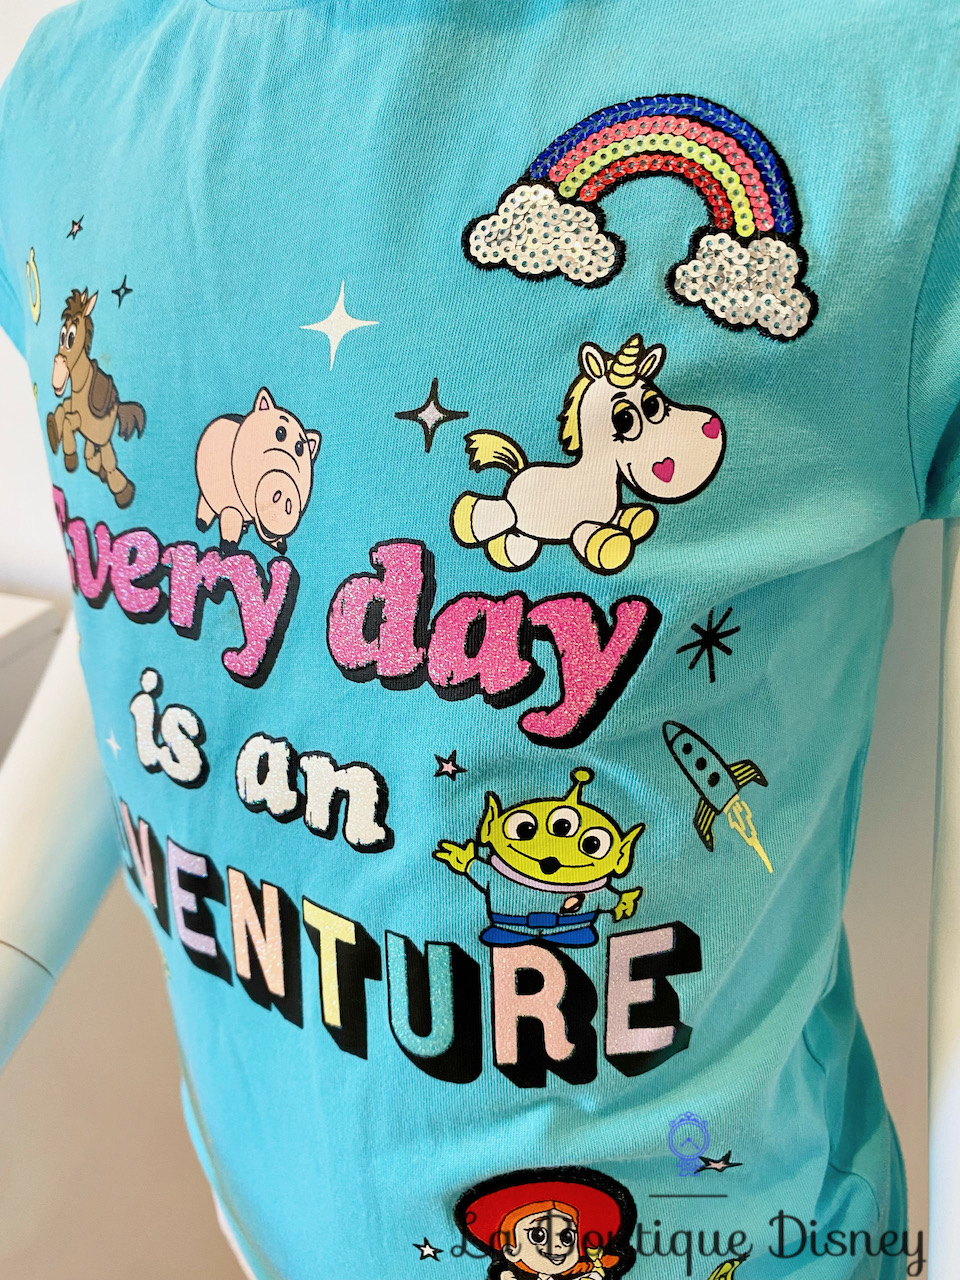 tee-shirt-toy-story-disney-store-every-day-is-an-adventure (4)